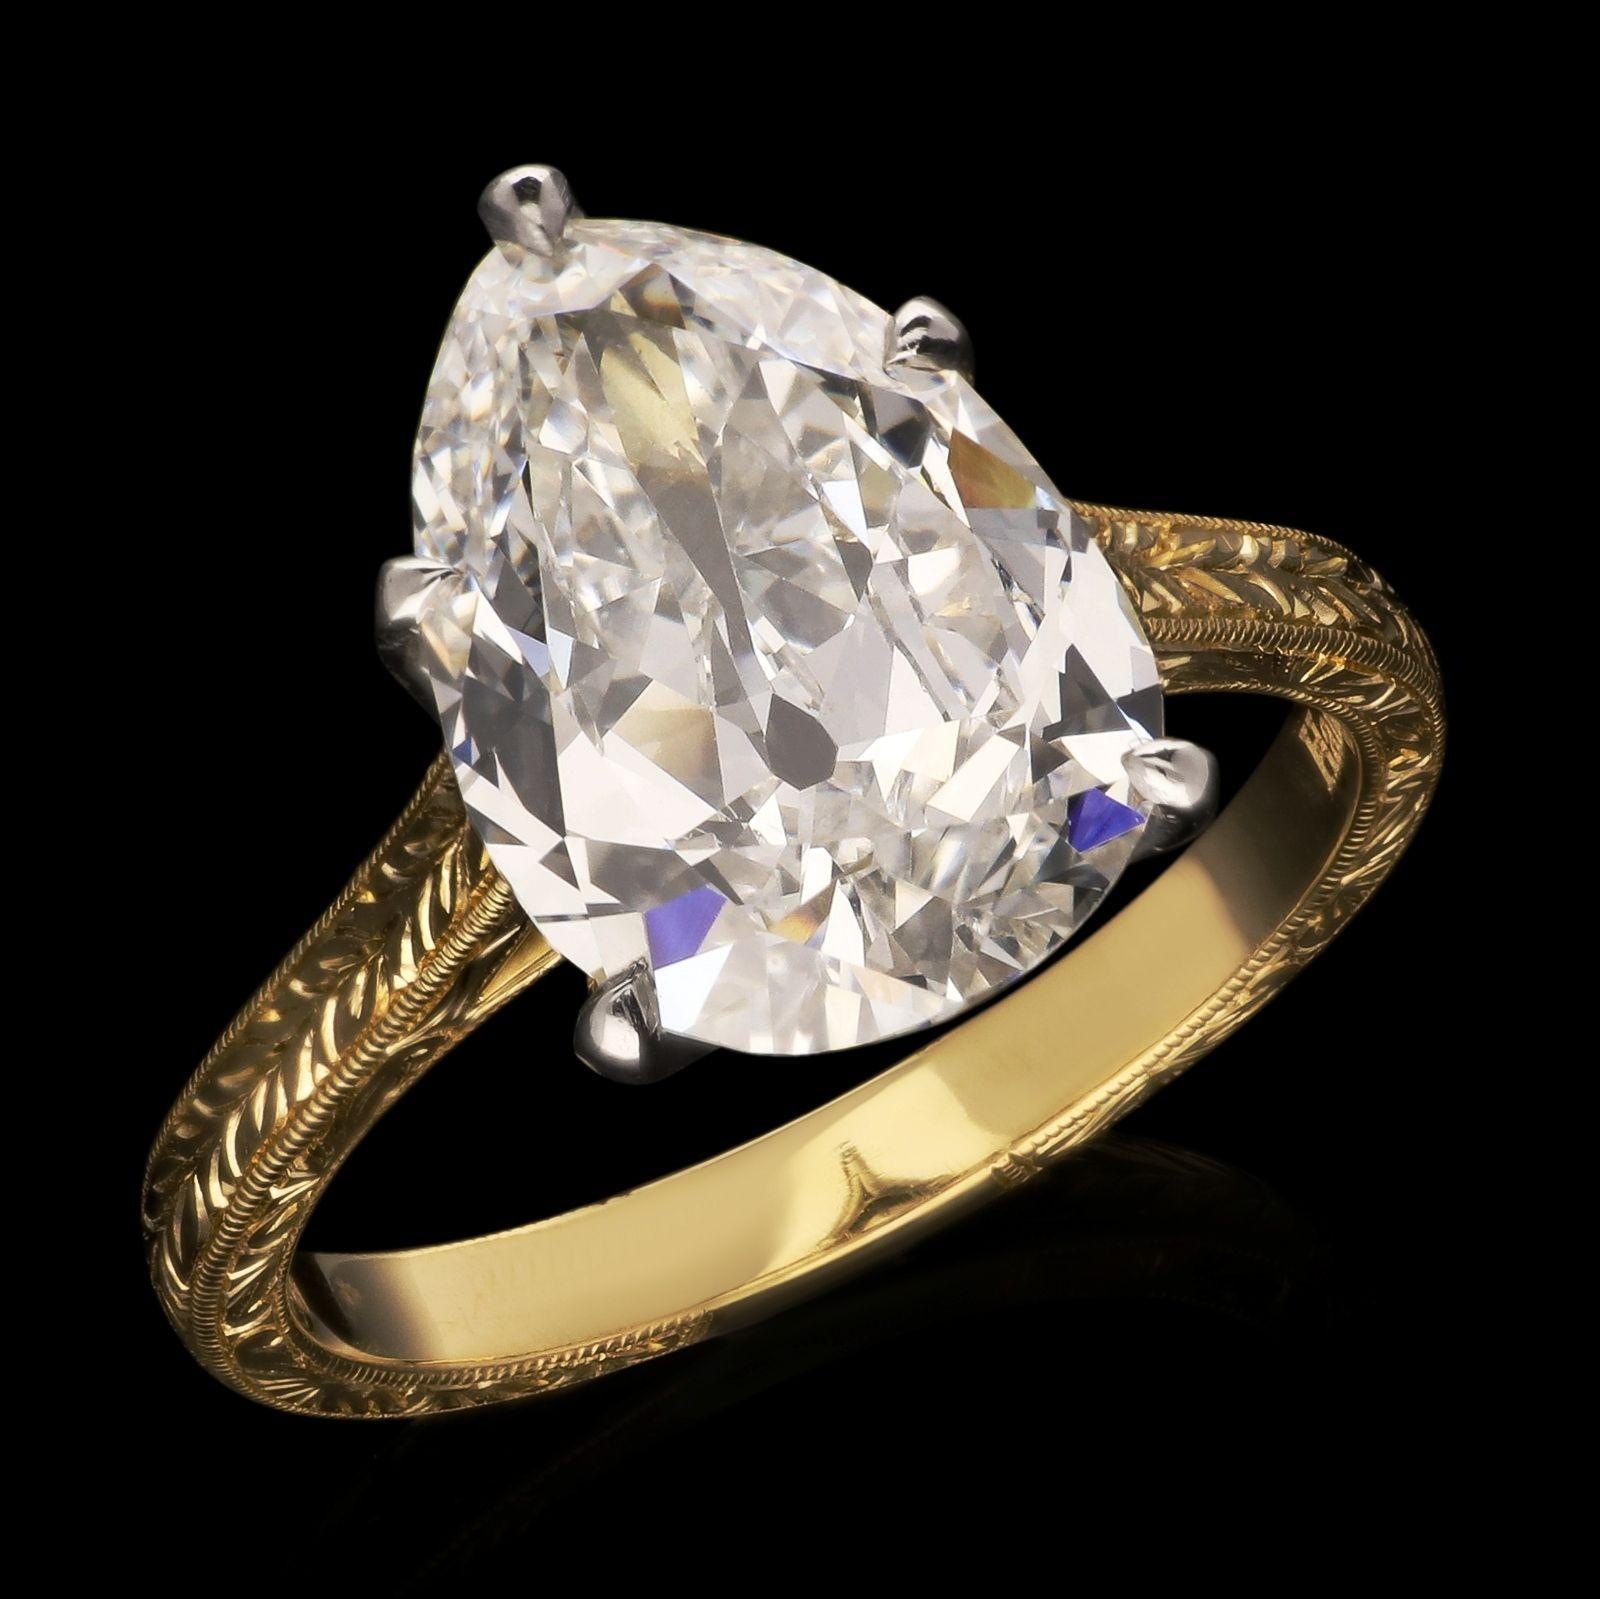 A stunning pear shape diamond solitaire ring by Hancocks, set with a wonderfully bright and lively old-cut pear-shaped diamond weighing 3.73ct and of G colour and VVS2 clarity, in a platinum five claw setting with scalloped gallery, all to a finely